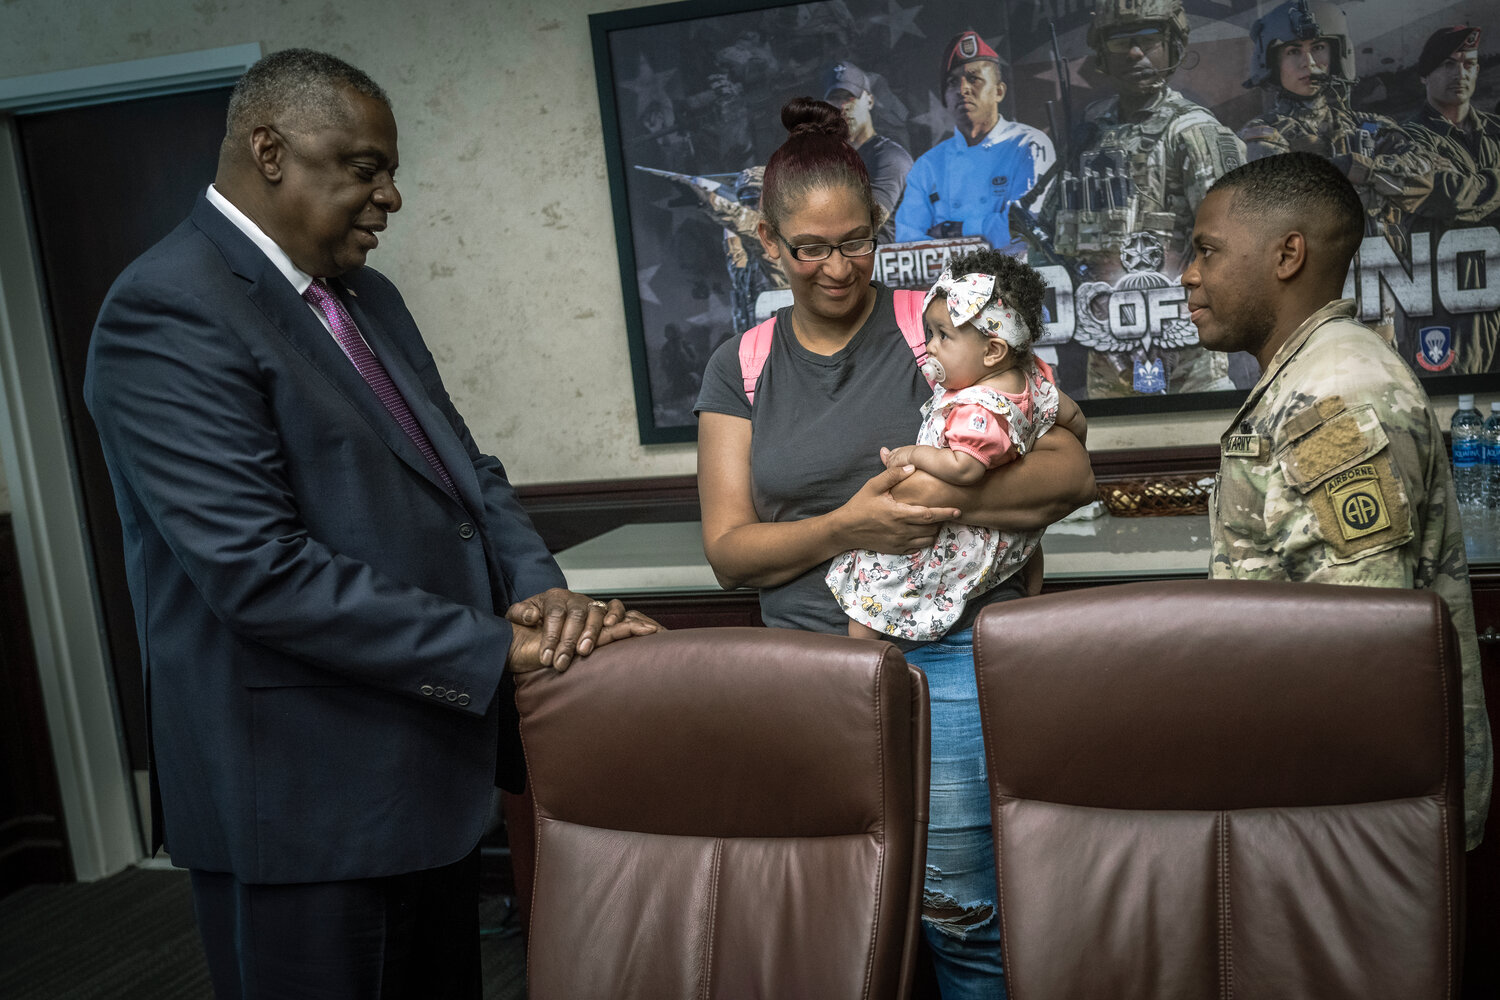 Secretary of Defense Lloyd J. Austin III speaks with Nicole Rosemont and Spc. Delton Wallace during a visit with families assigned to the 82nd Airborne Division on Friday.